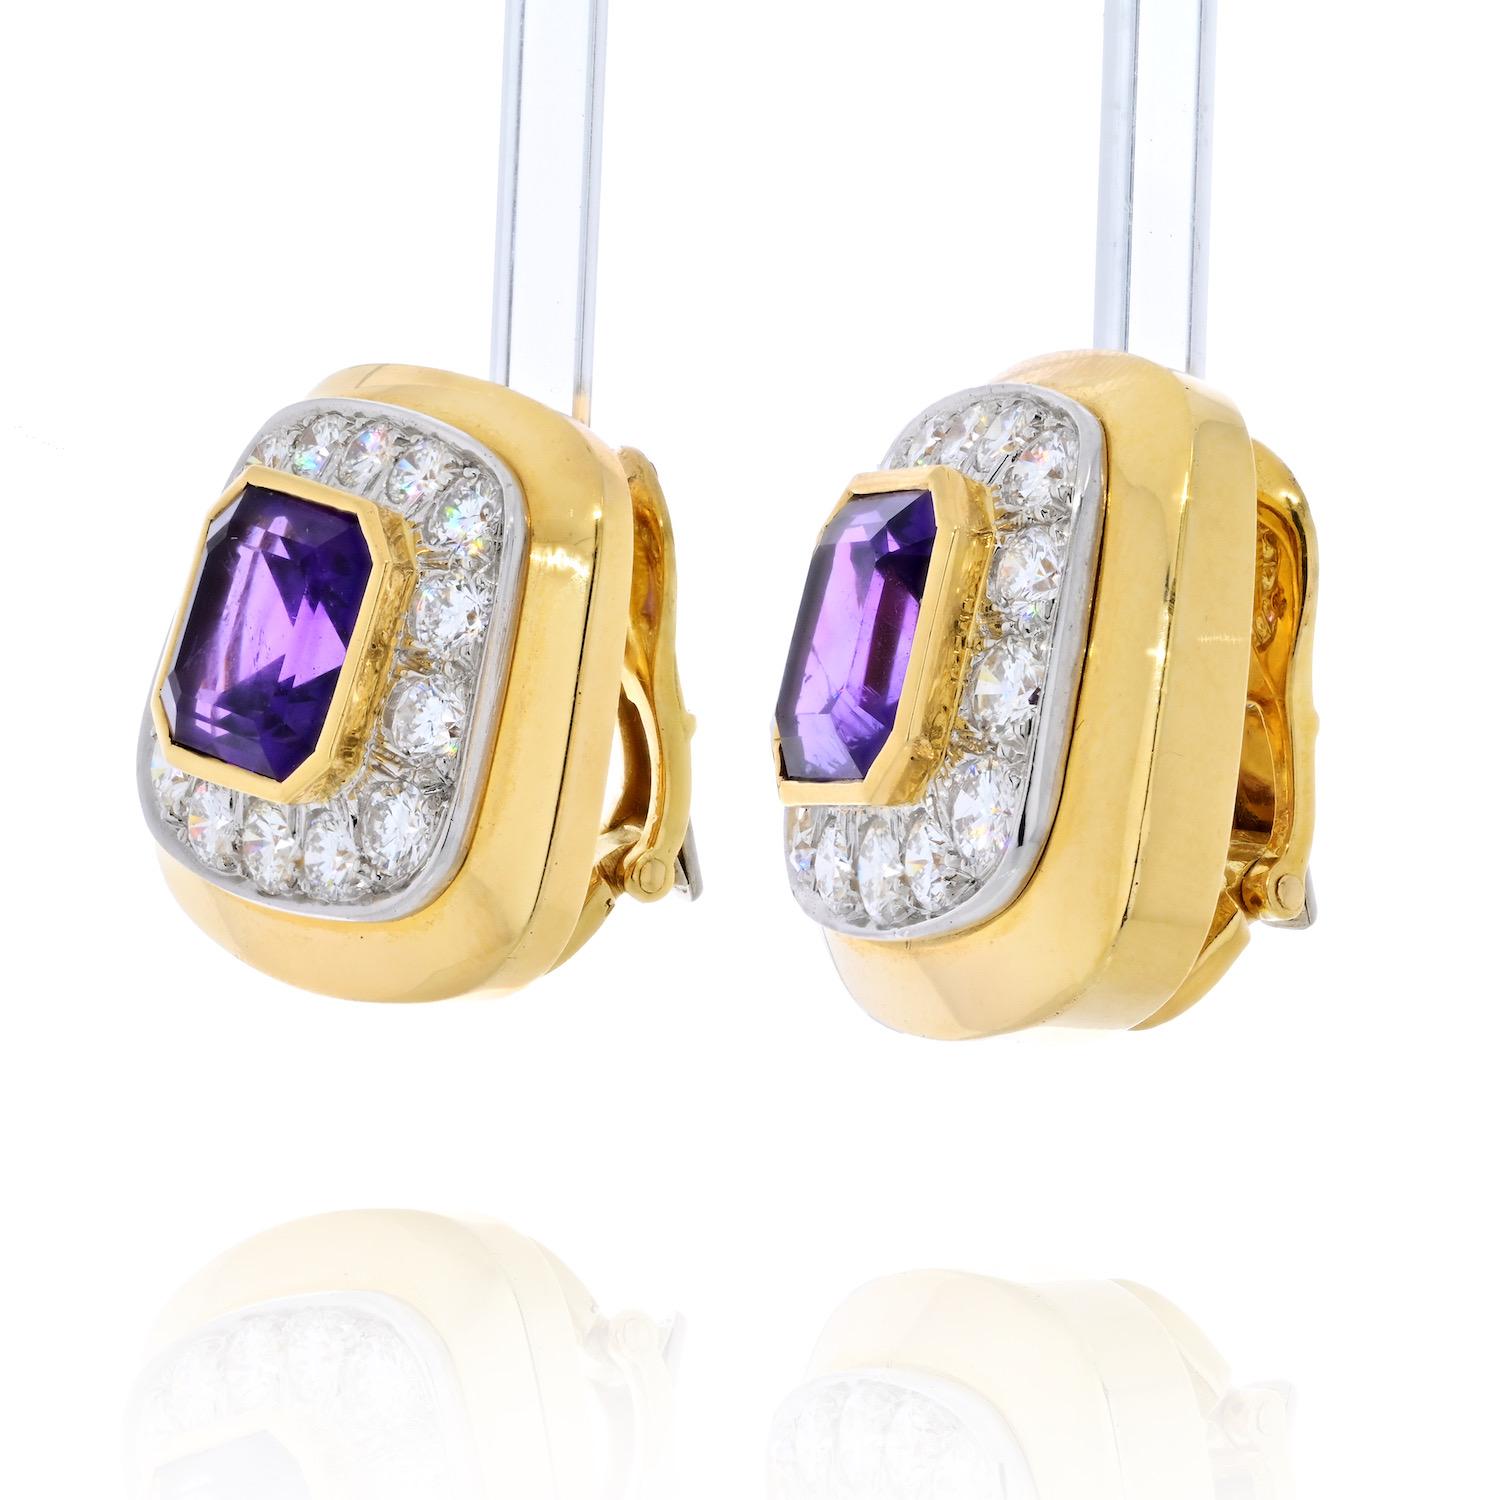 David Webb 18K Yellow Gold cushion shaped ear clip earrings mounted in gold with round cut diamonds, and cushion shaped purple amethysts. 
The earrings measure approx 1 inch wide. 
Clip on backings.